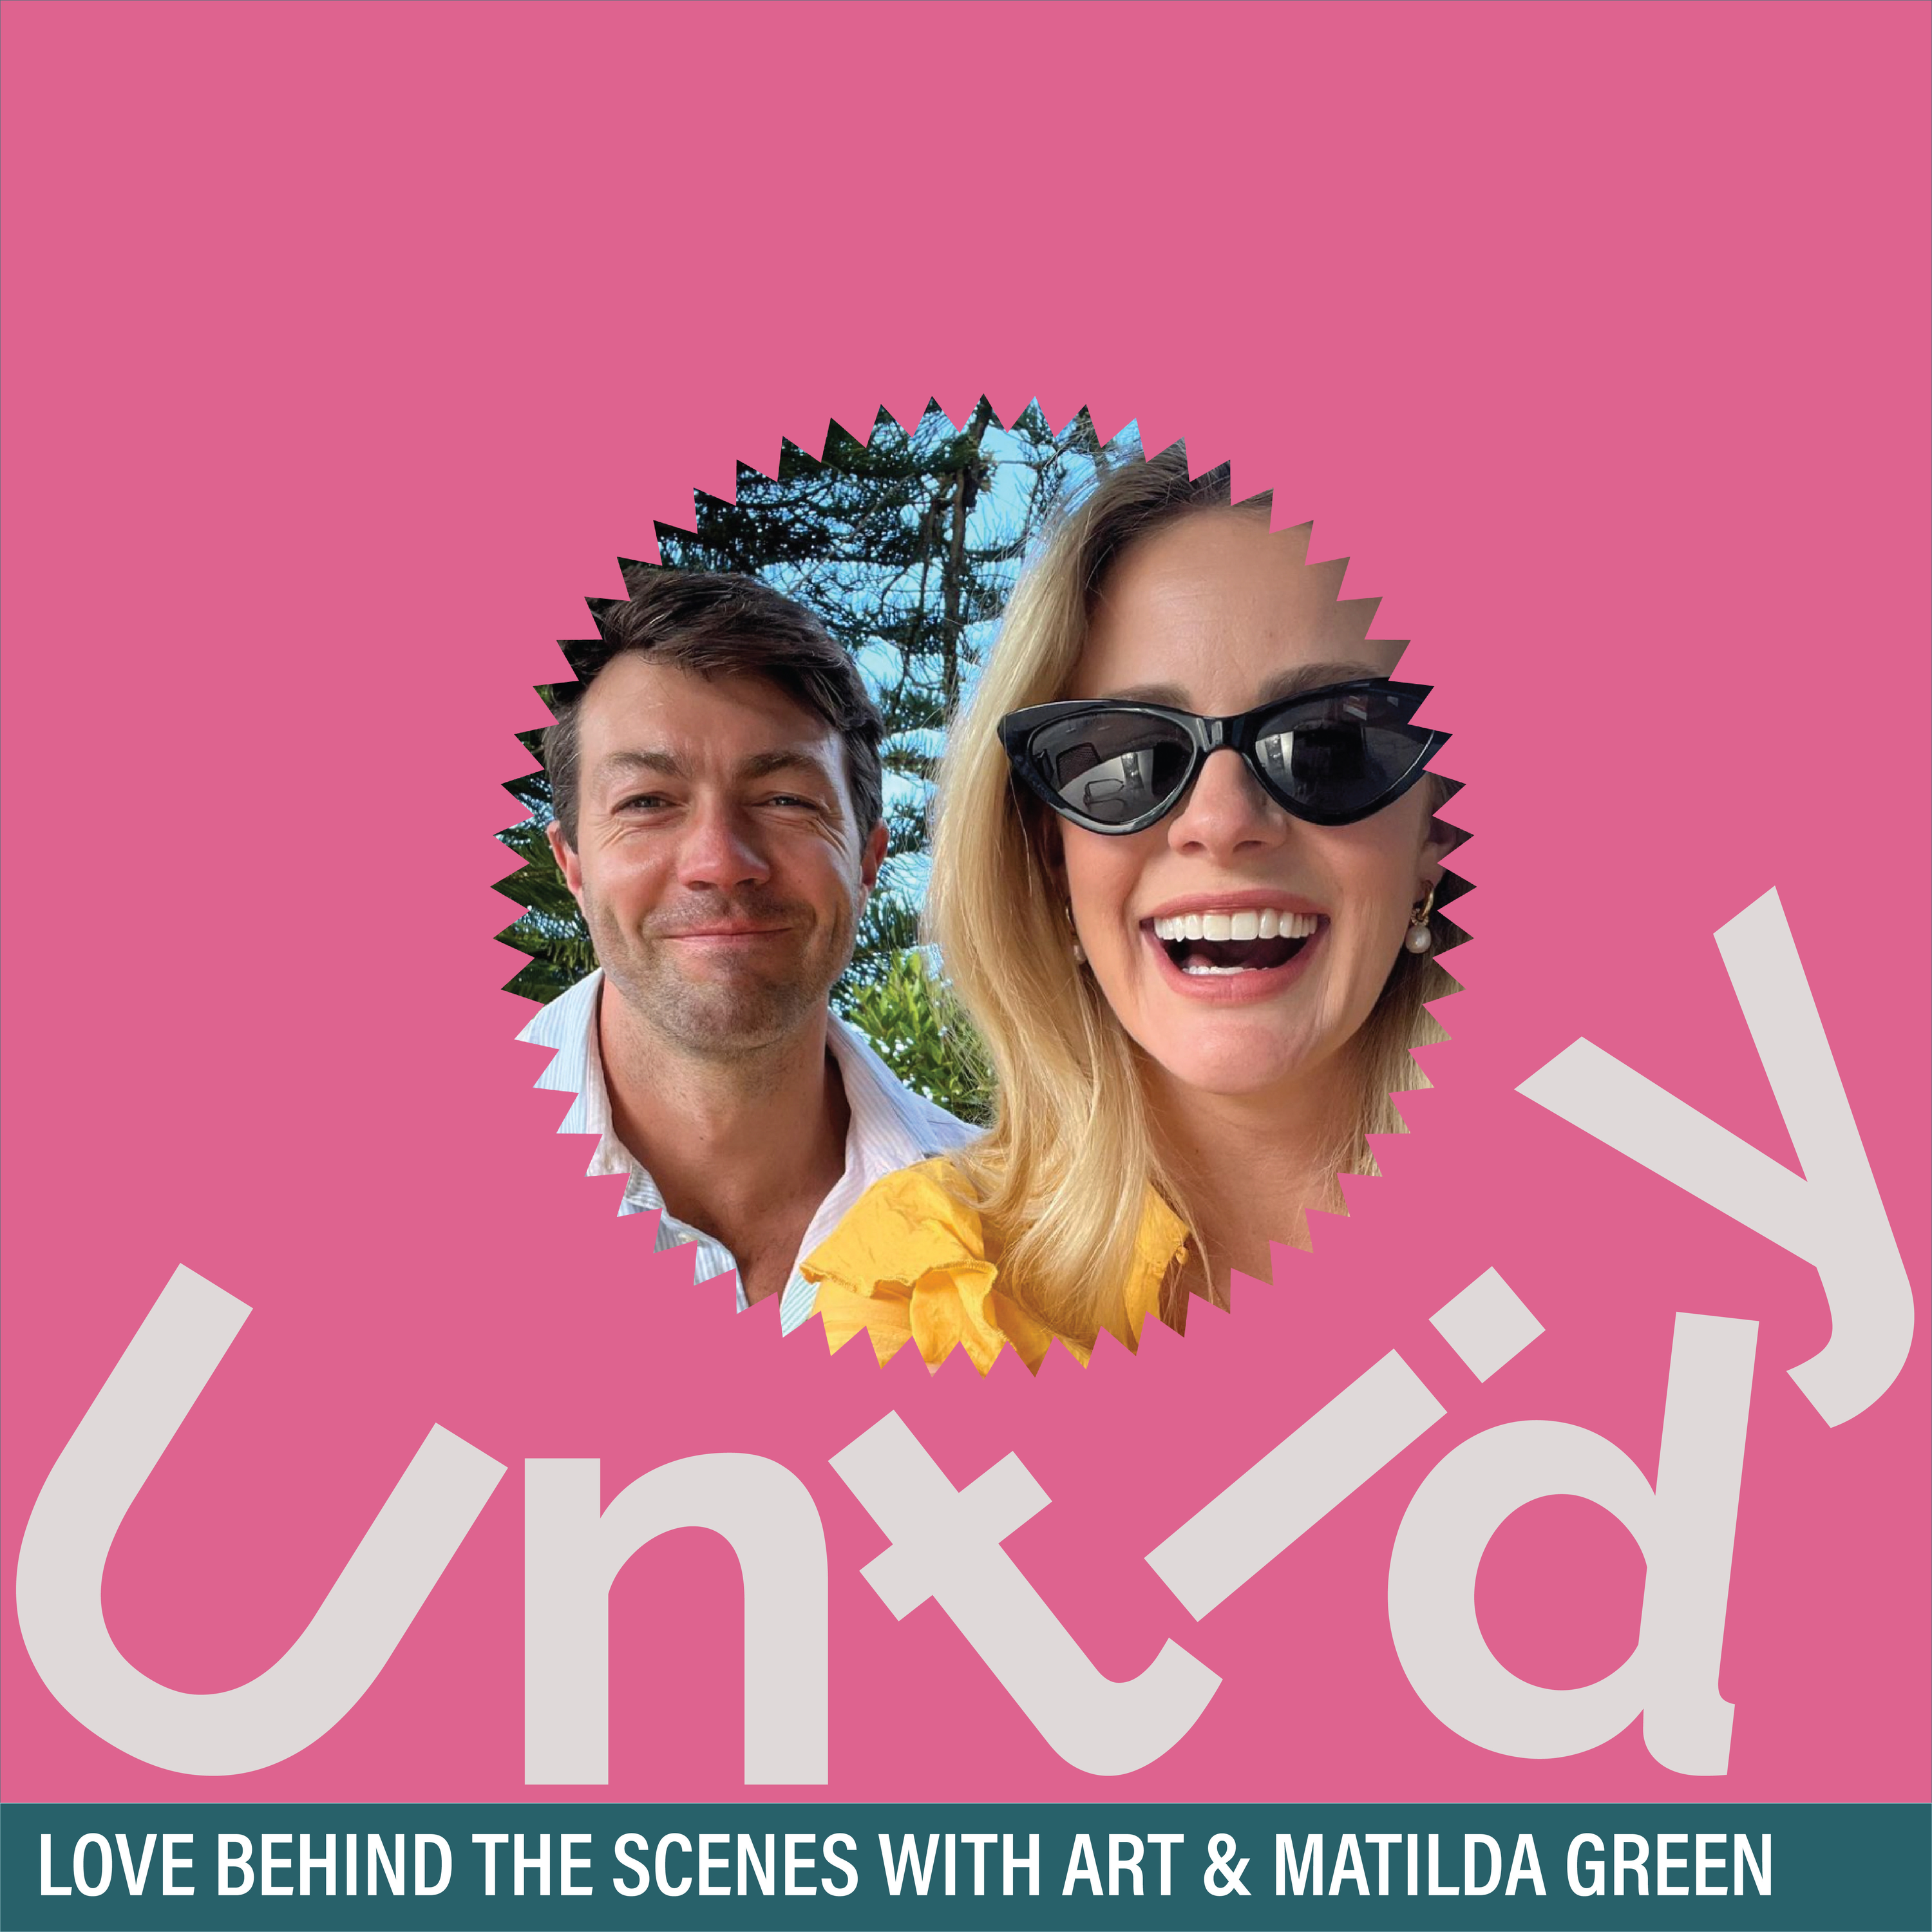 Love behind the scenes with Art & Matilda Green